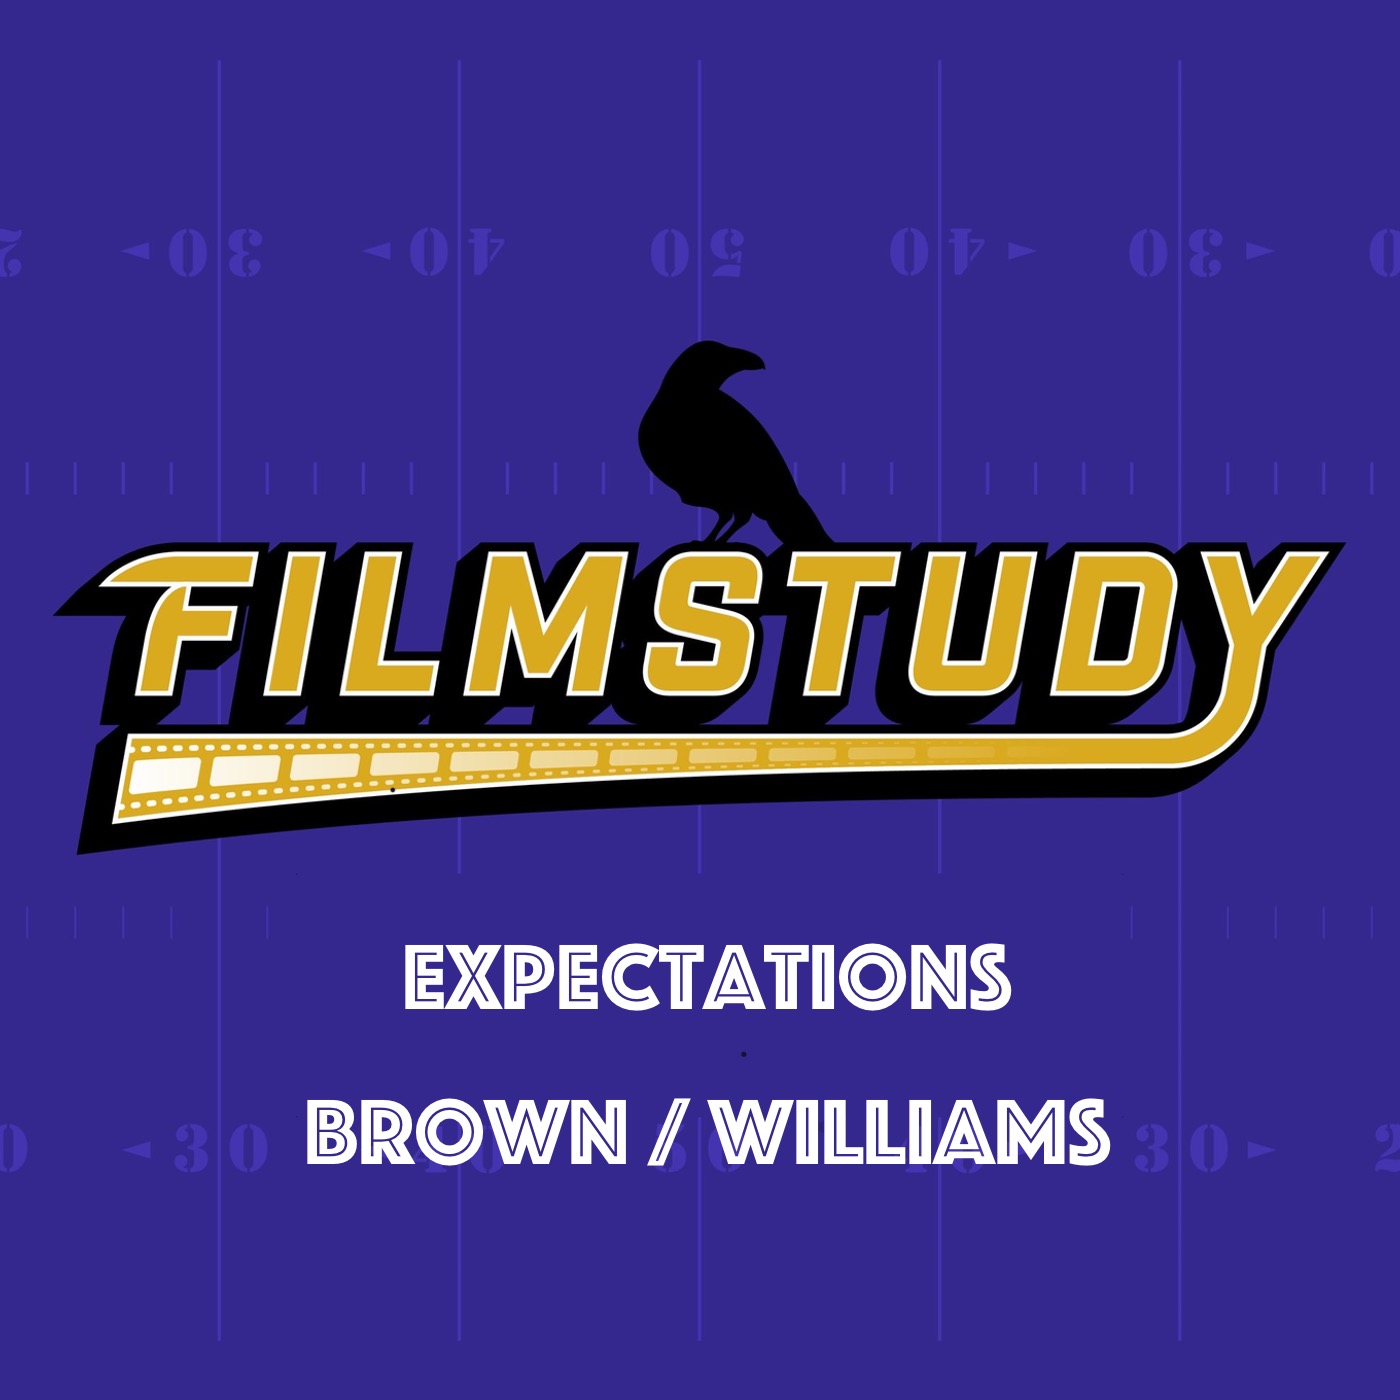 Expectations Brown / Williams